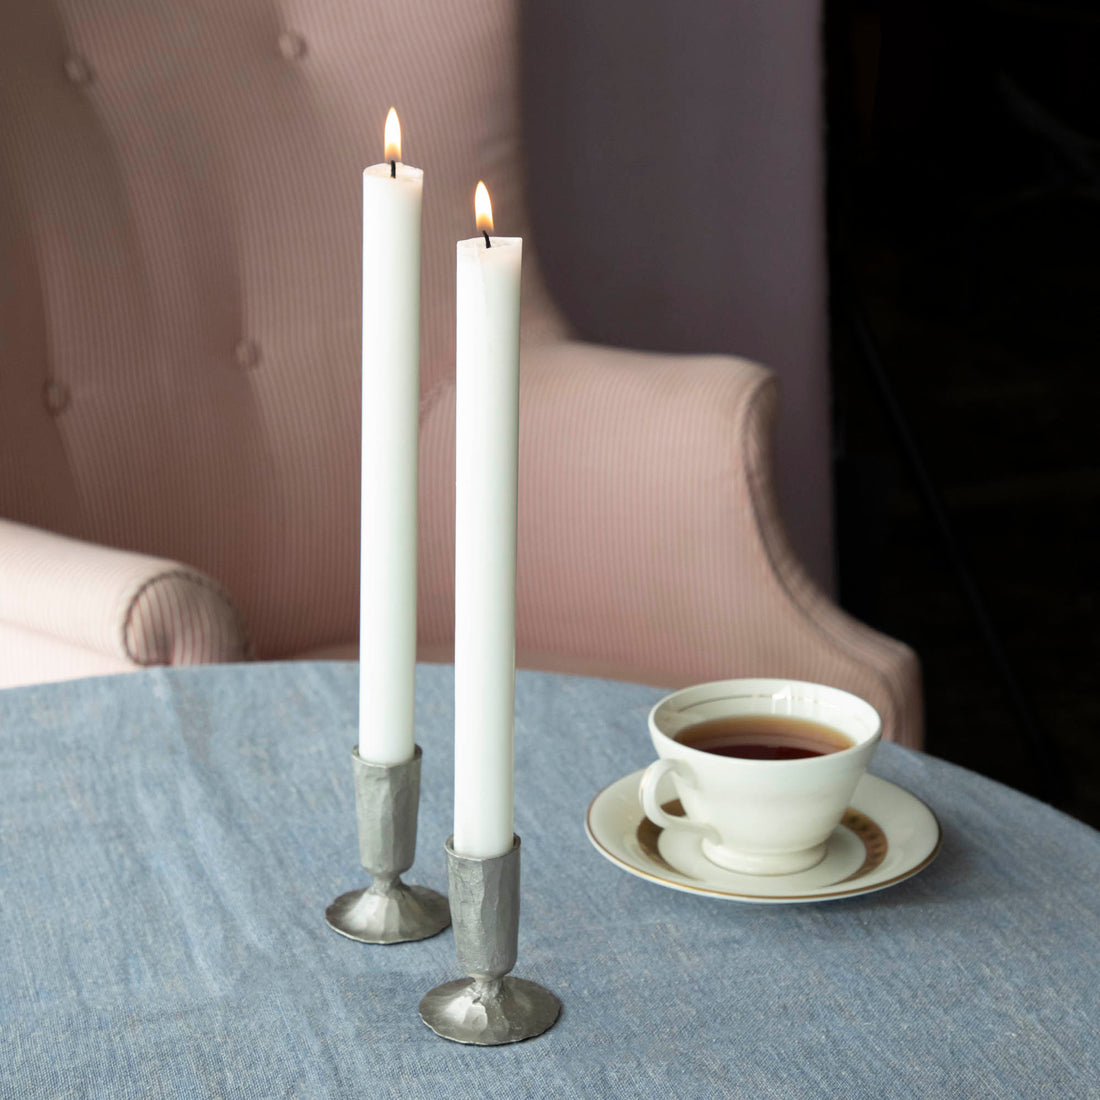 Two lit candles in Creative Co-Op metal taper holders on a table with a cup of tea in the background.